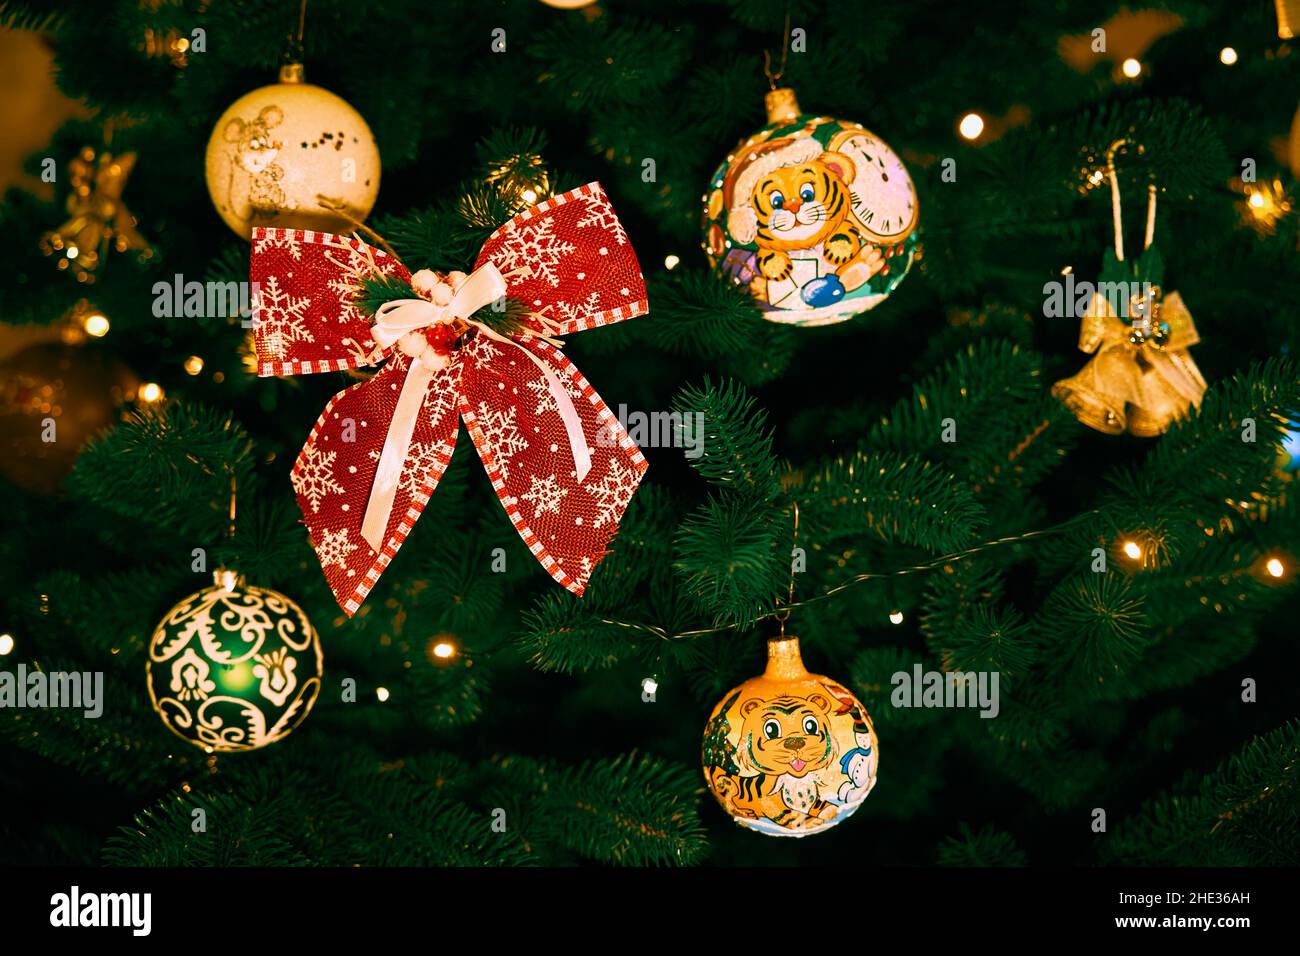 Christmas tree decorated with Christmas light and balls with a picture of a tiger and a red bow Stock Photo